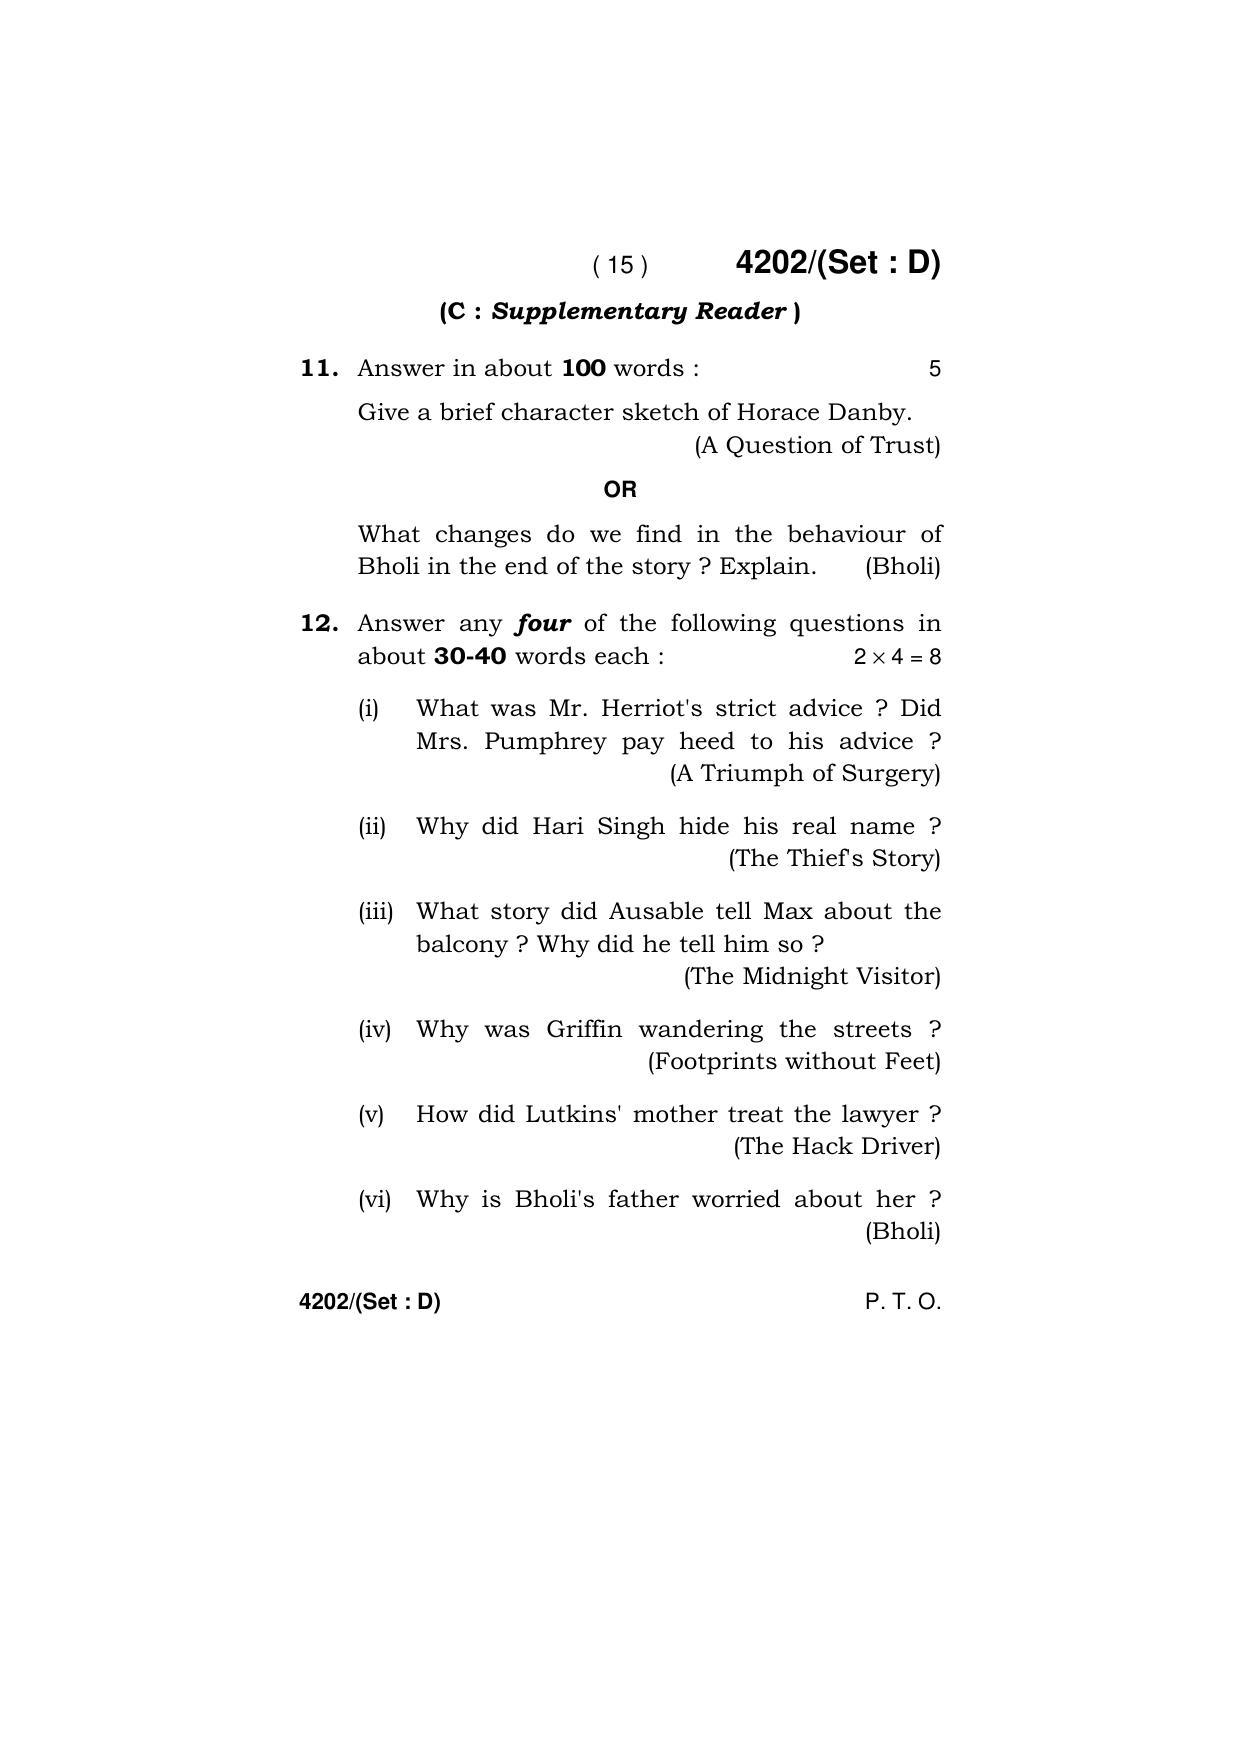 Haryana Board HBSE Class 10 English (All Set) 2019 Question Paper - Page 63